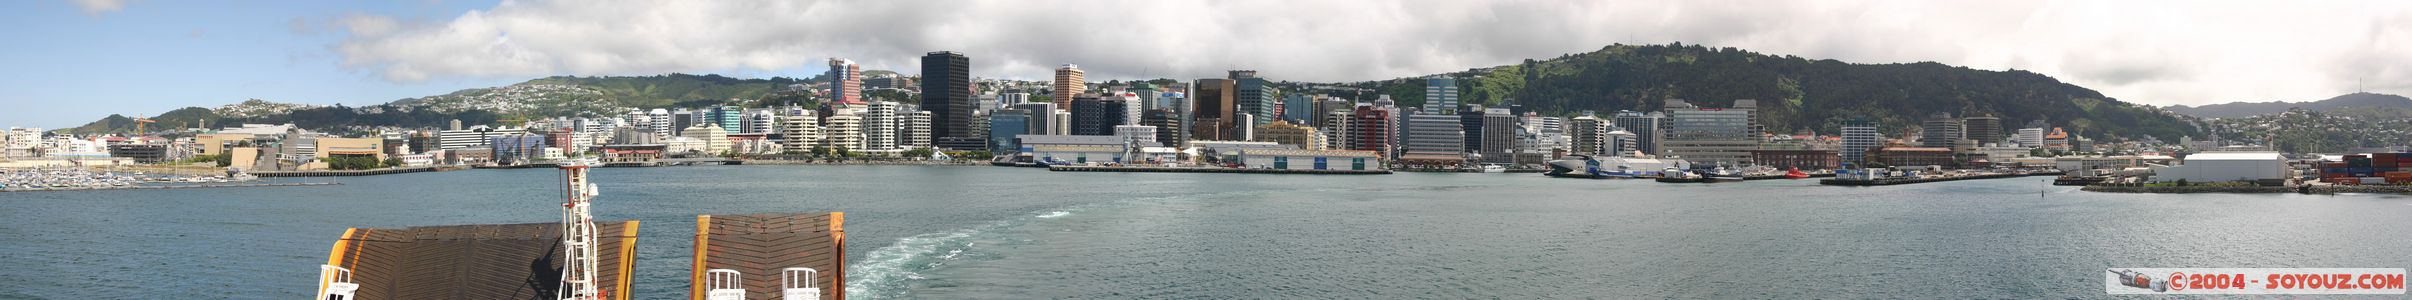 Wellington - panorama from the sea
Mots-clés: New Zealand North Island panorama